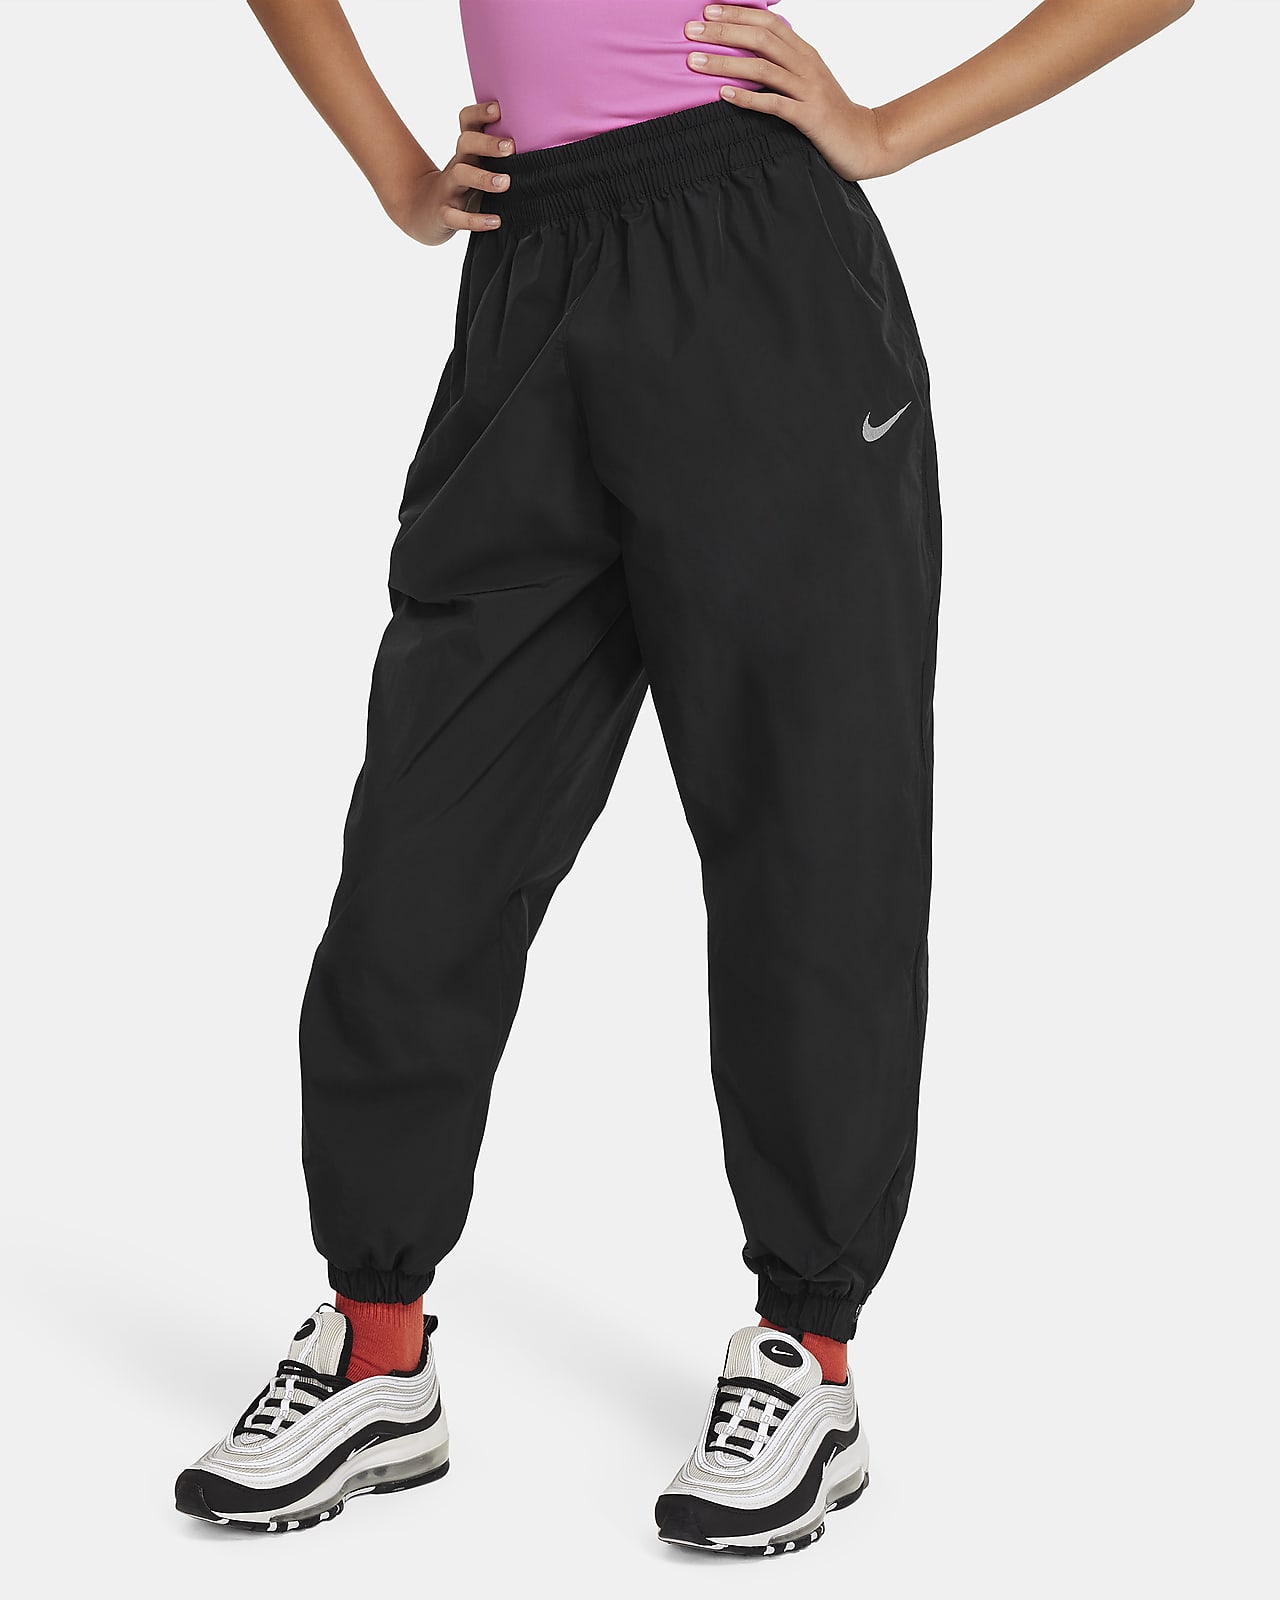 https://static.nike.com/a/images/t_PDP_1280_v1/f_auto,q_auto:eco/92488af9-7349-4524-90d0-cf0ca6d57280/sportswear-older-woven-trousers-7Tg8nF.png